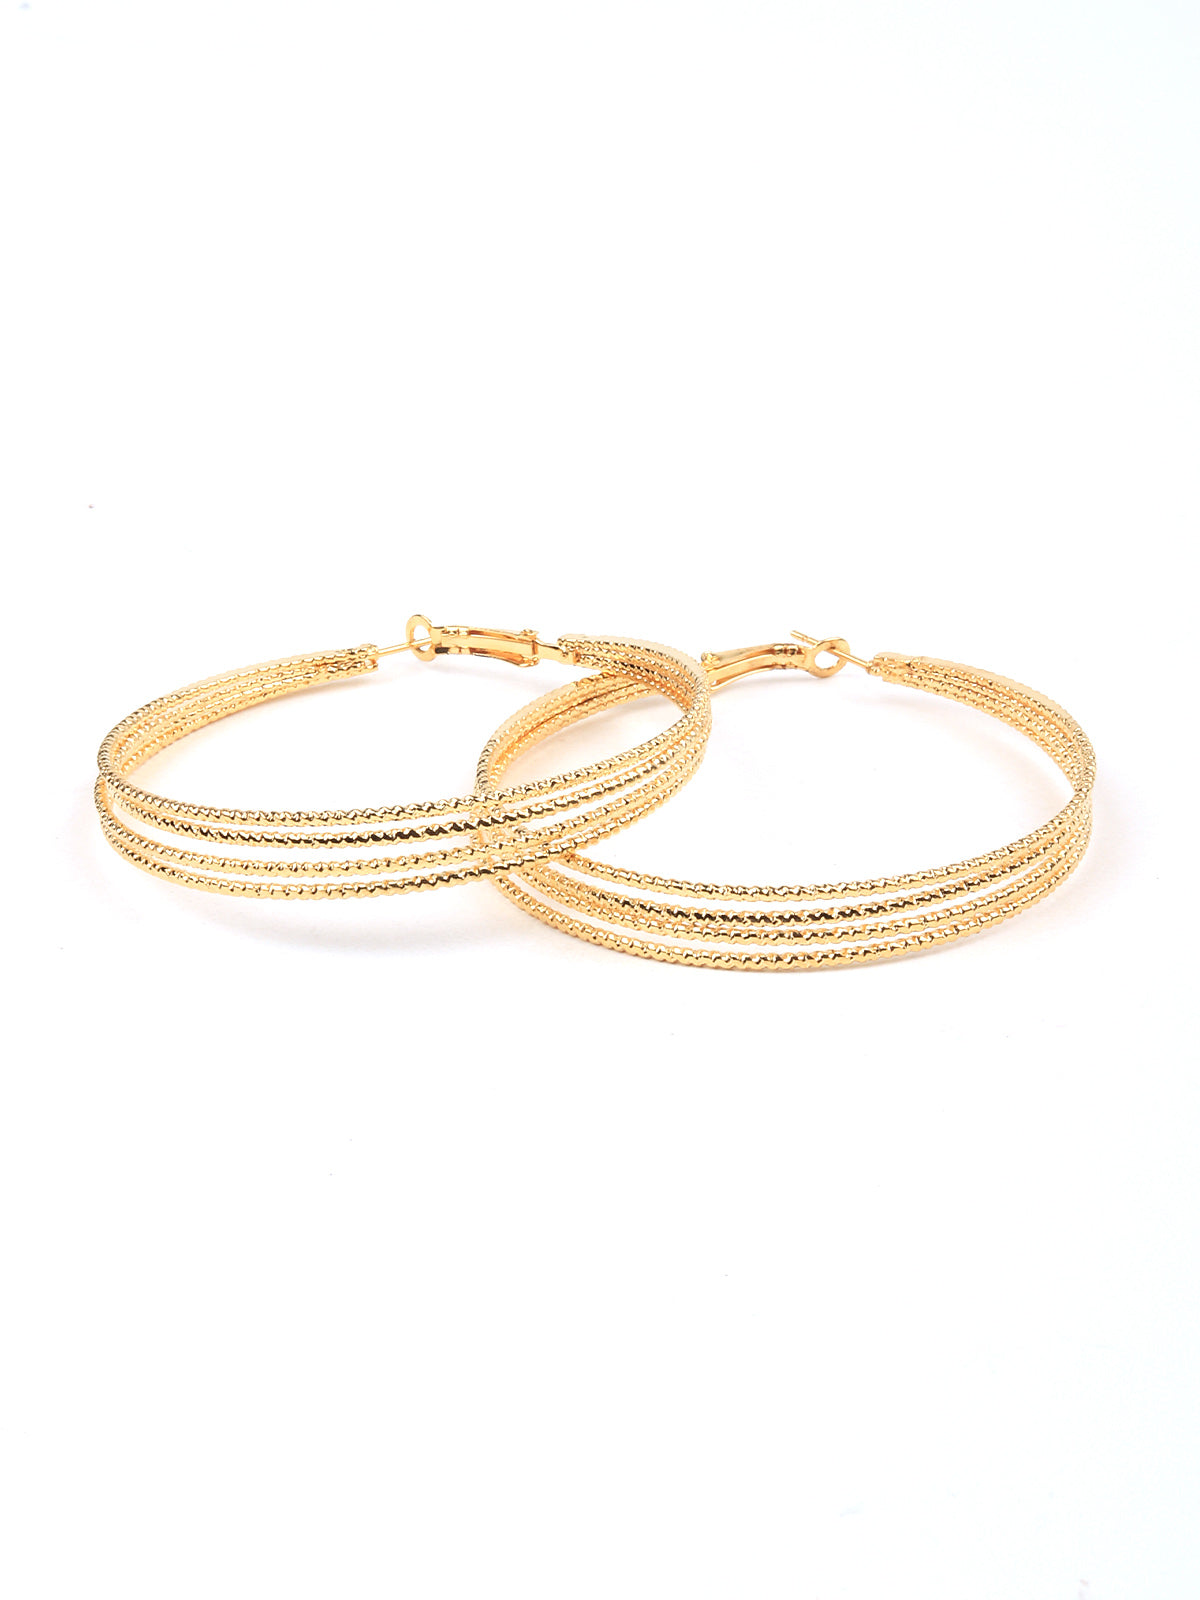 Odette Women Gold Colored Four Layered Hoop Earrings